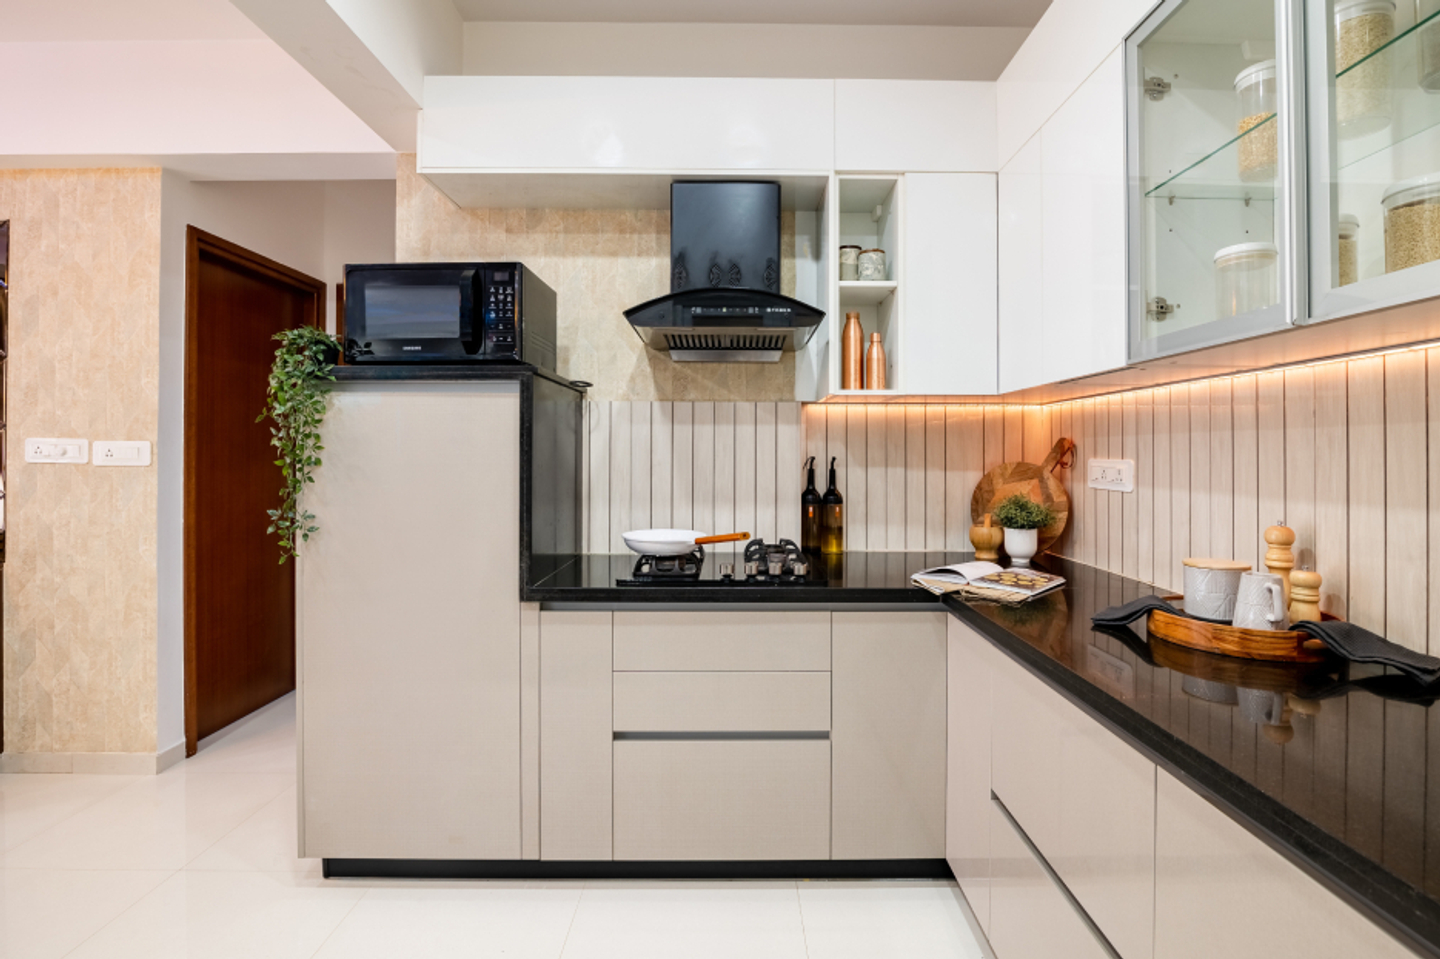 Contemporary L-Shaped Modular Kitchen Cabinet Design With Profile Lighting